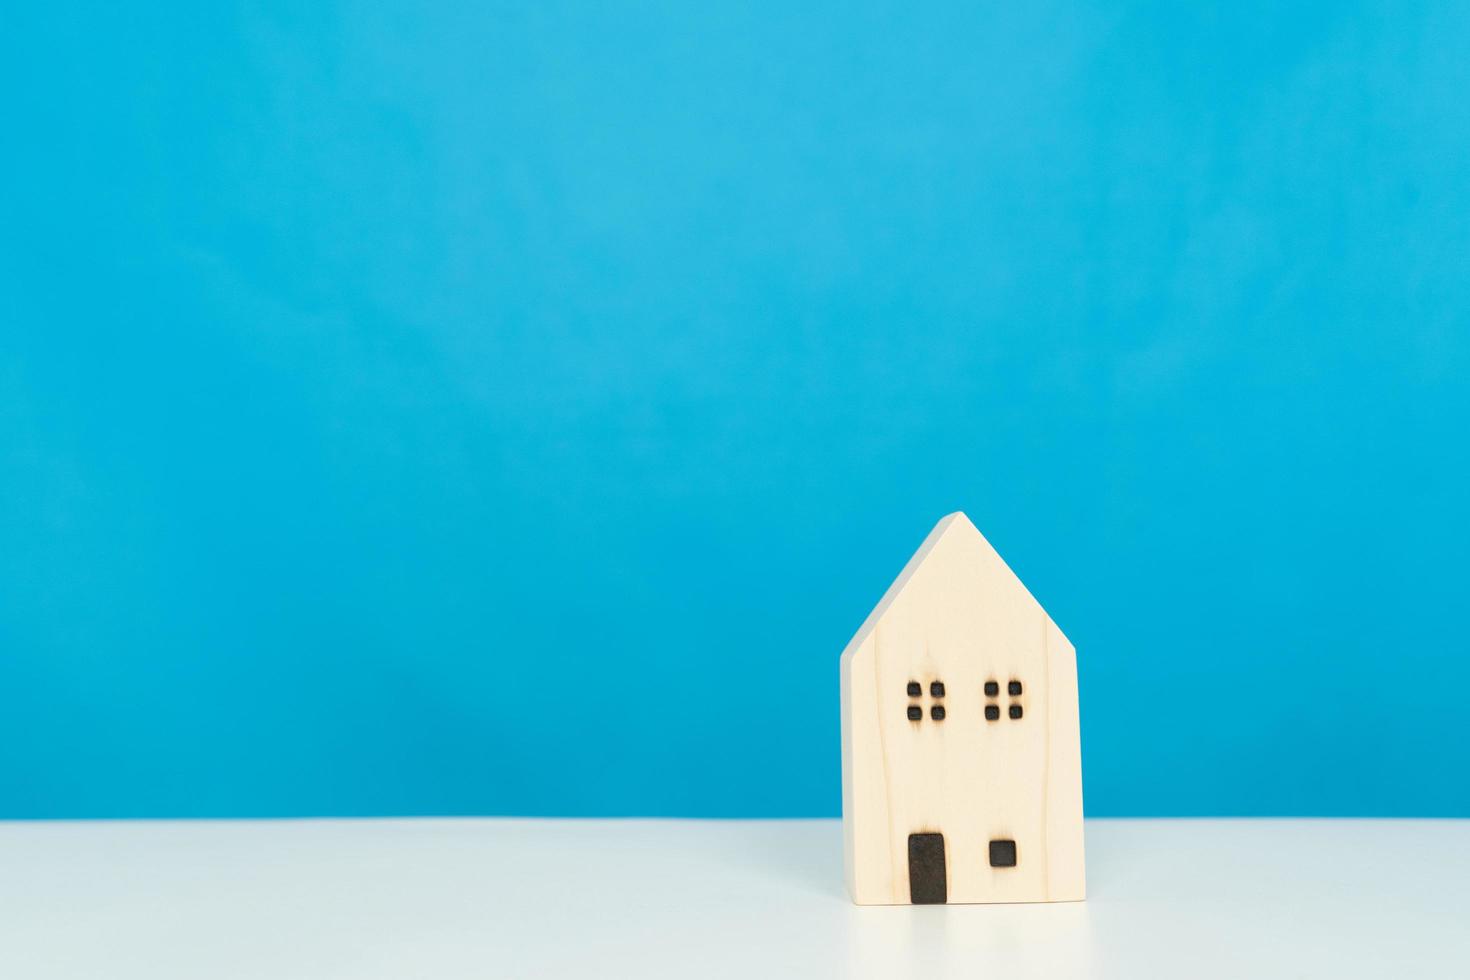 A wooden house on a blue background, loans market concept photo